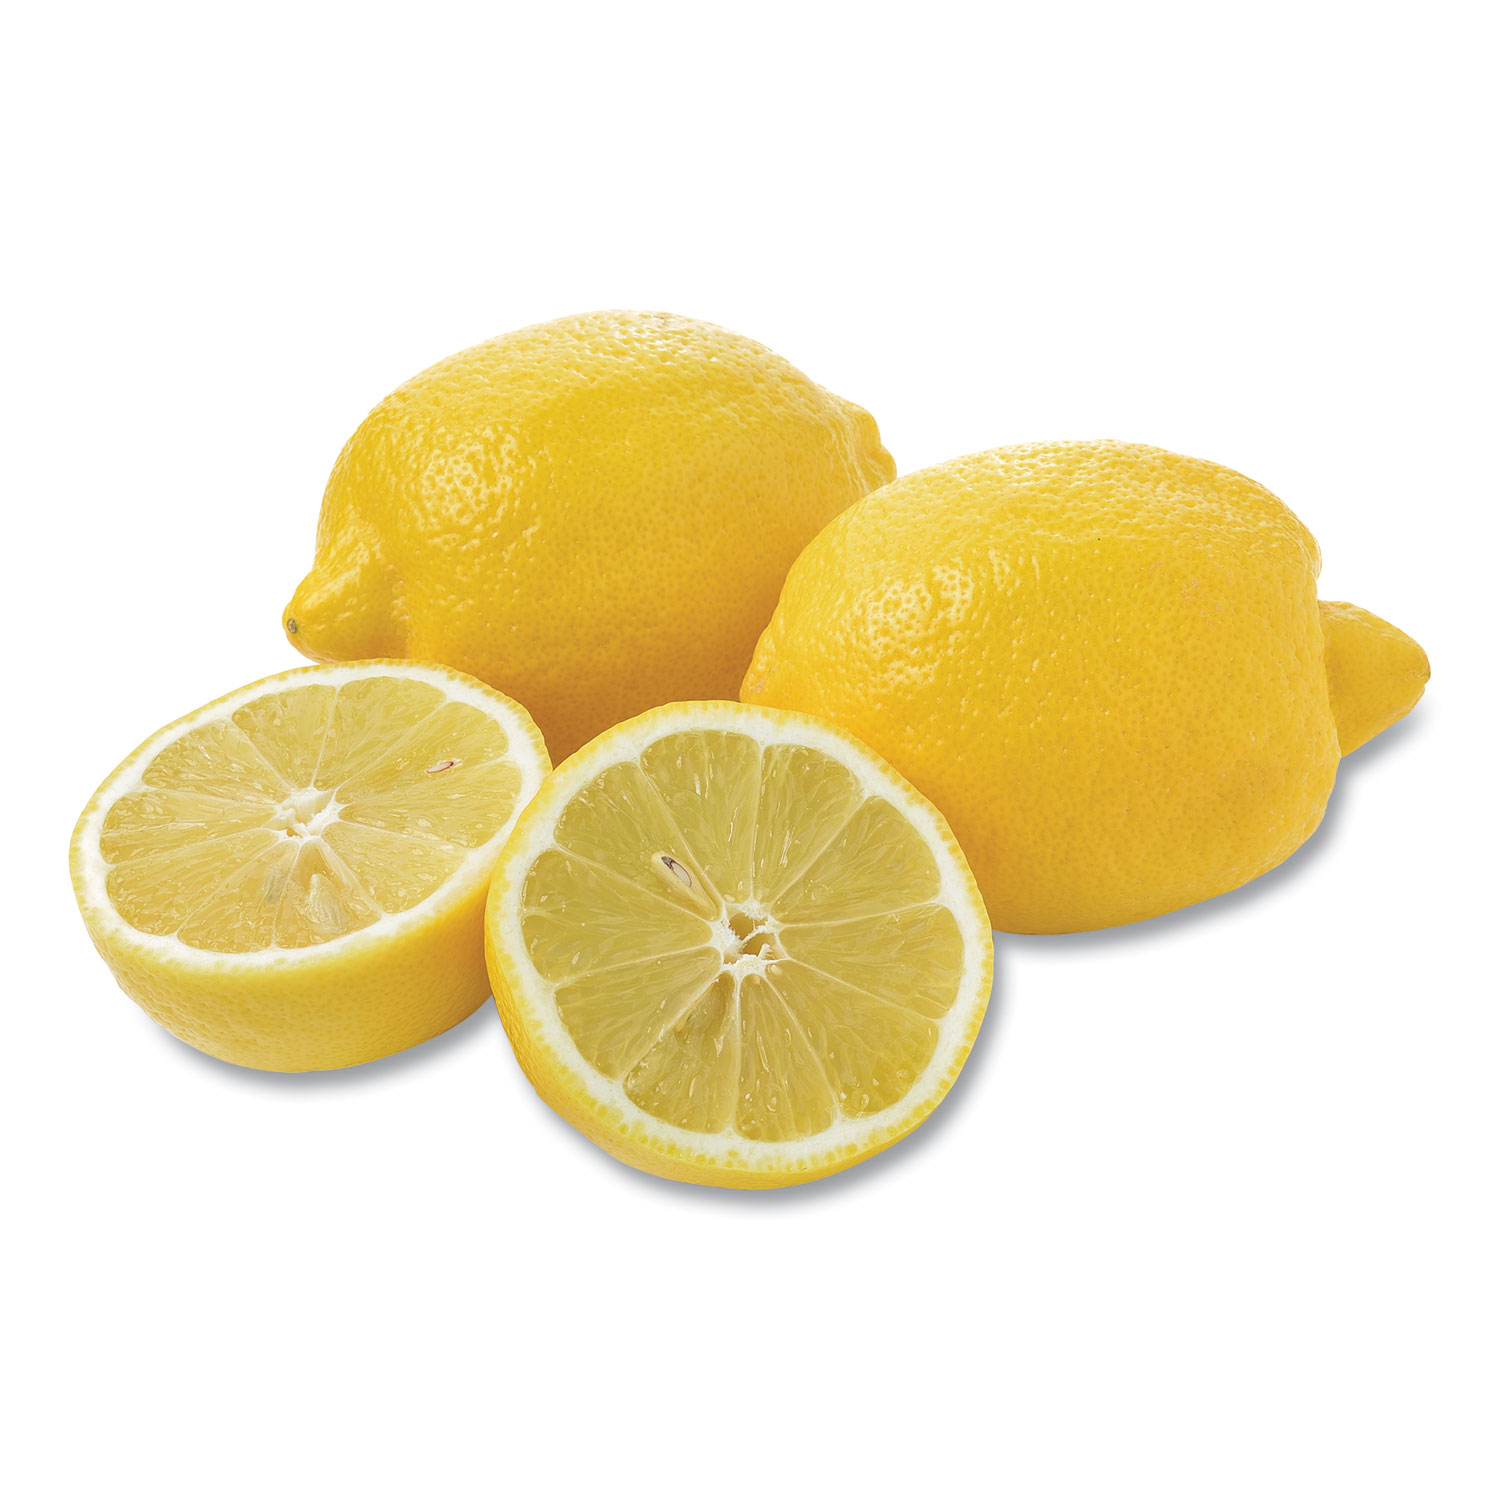 National Brand Fresh Lemons, 3 lbs, Free Delivery in 1-4 Business Days